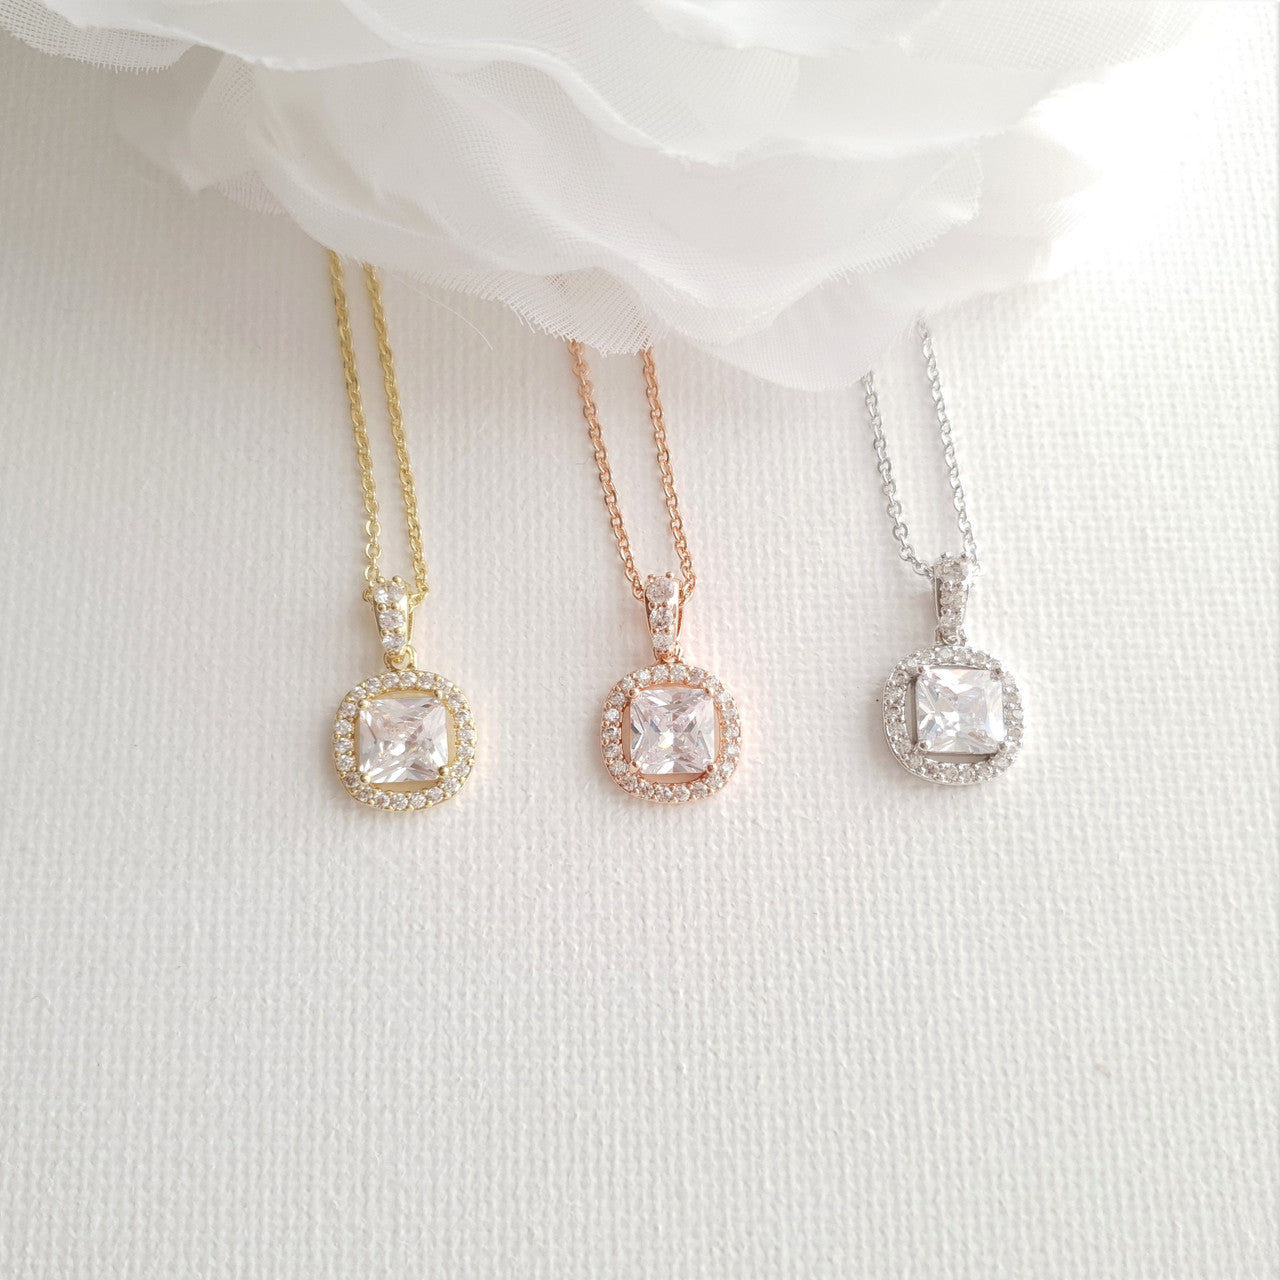 Earrings and Necklace Bridesmaids Jewellery Set-Piper